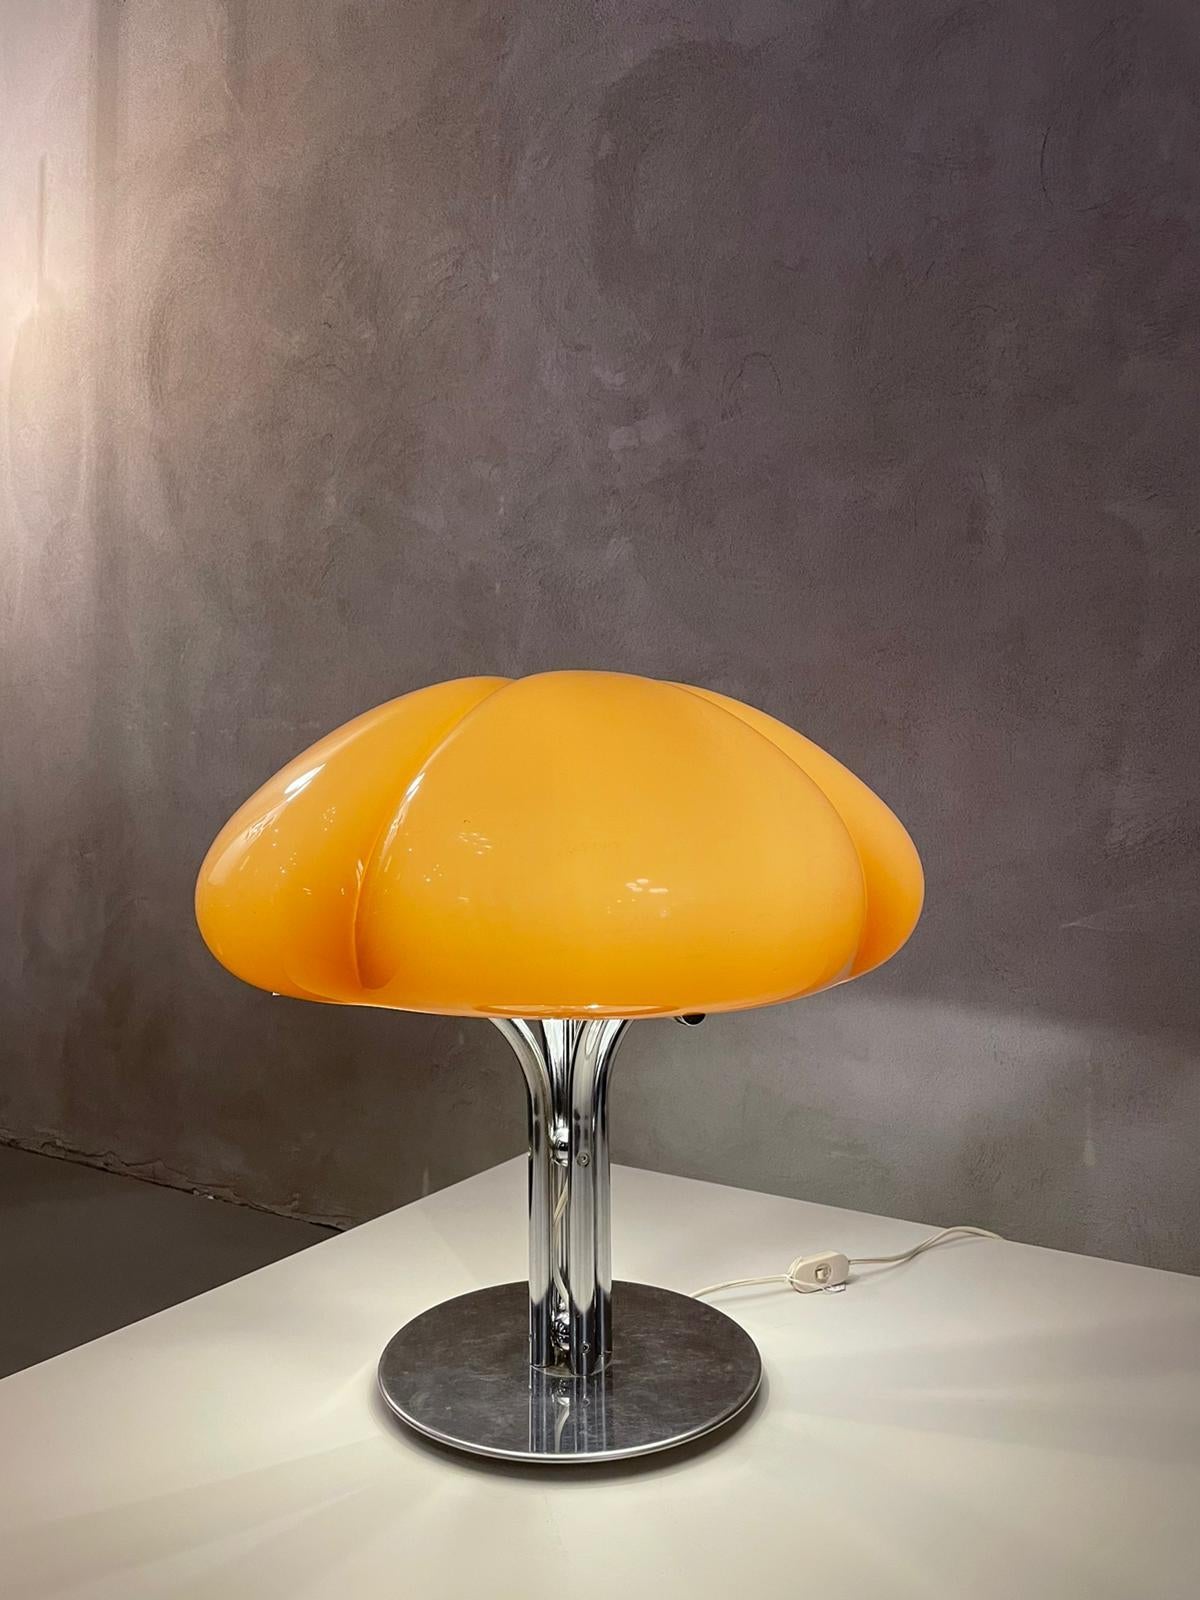 Table lamp Mod. Quadrifoglio designed by Gae Aulenti for Harvey Guzzini in Italy, 1974.
Lamp whose plastic diffuser is in beige colored and in the shape of a four-leaf clover under which there is the attachment for three bulbs.
The remaining